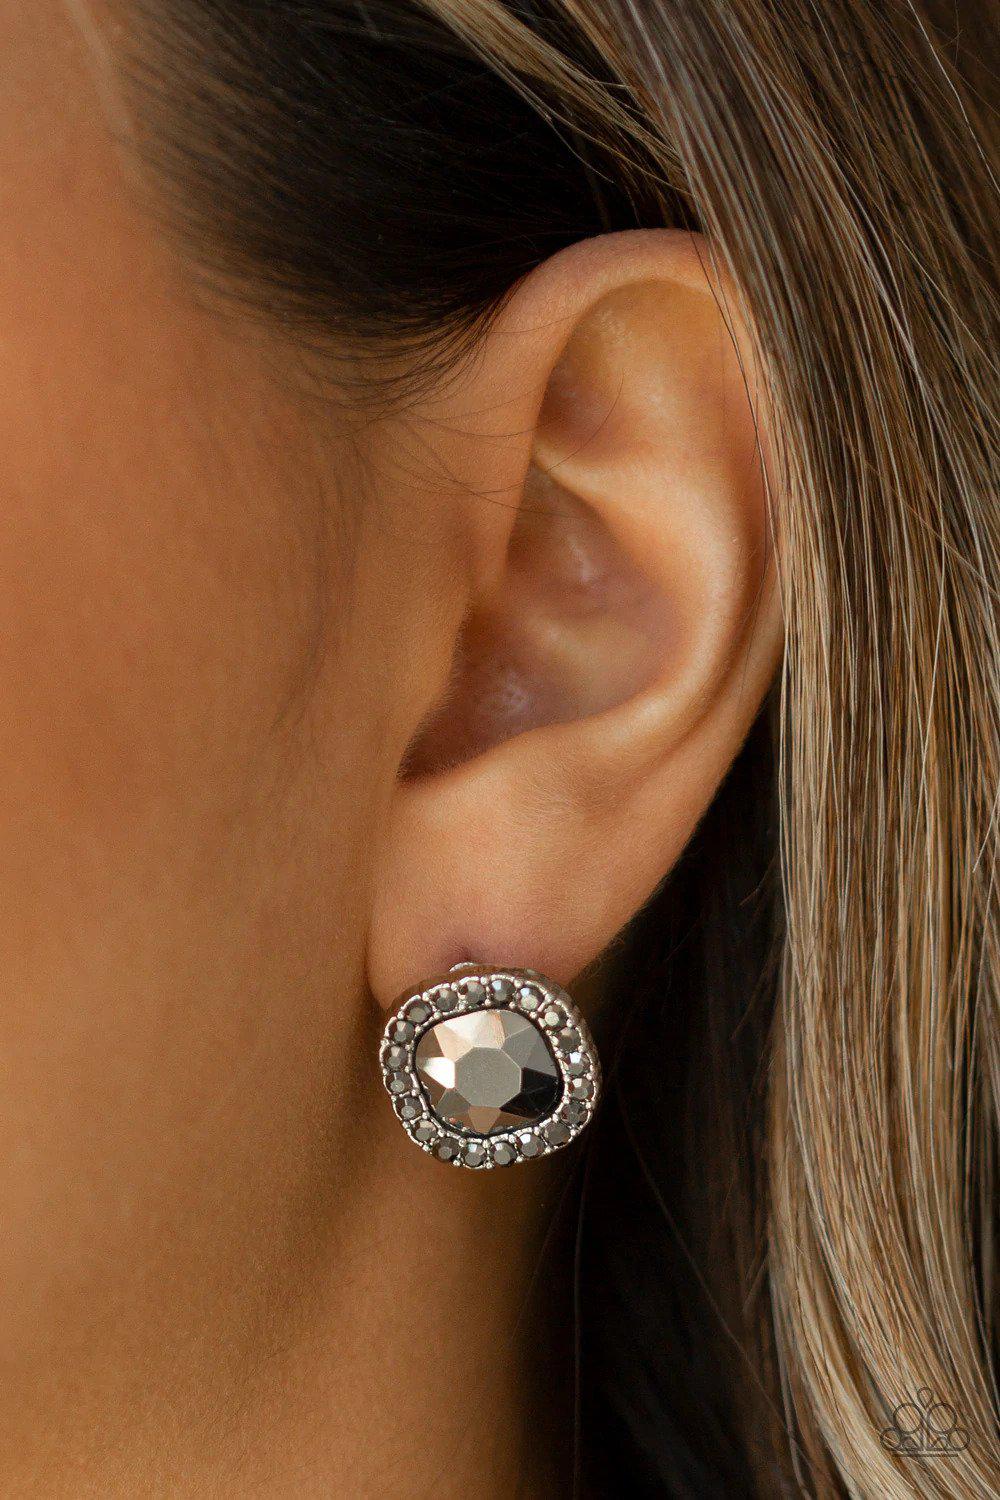 Bling Tastic! Silver Earrings - Paparazzi Accessories- on model - CarasShop.com - $5 Jewelry by Cara Jewels